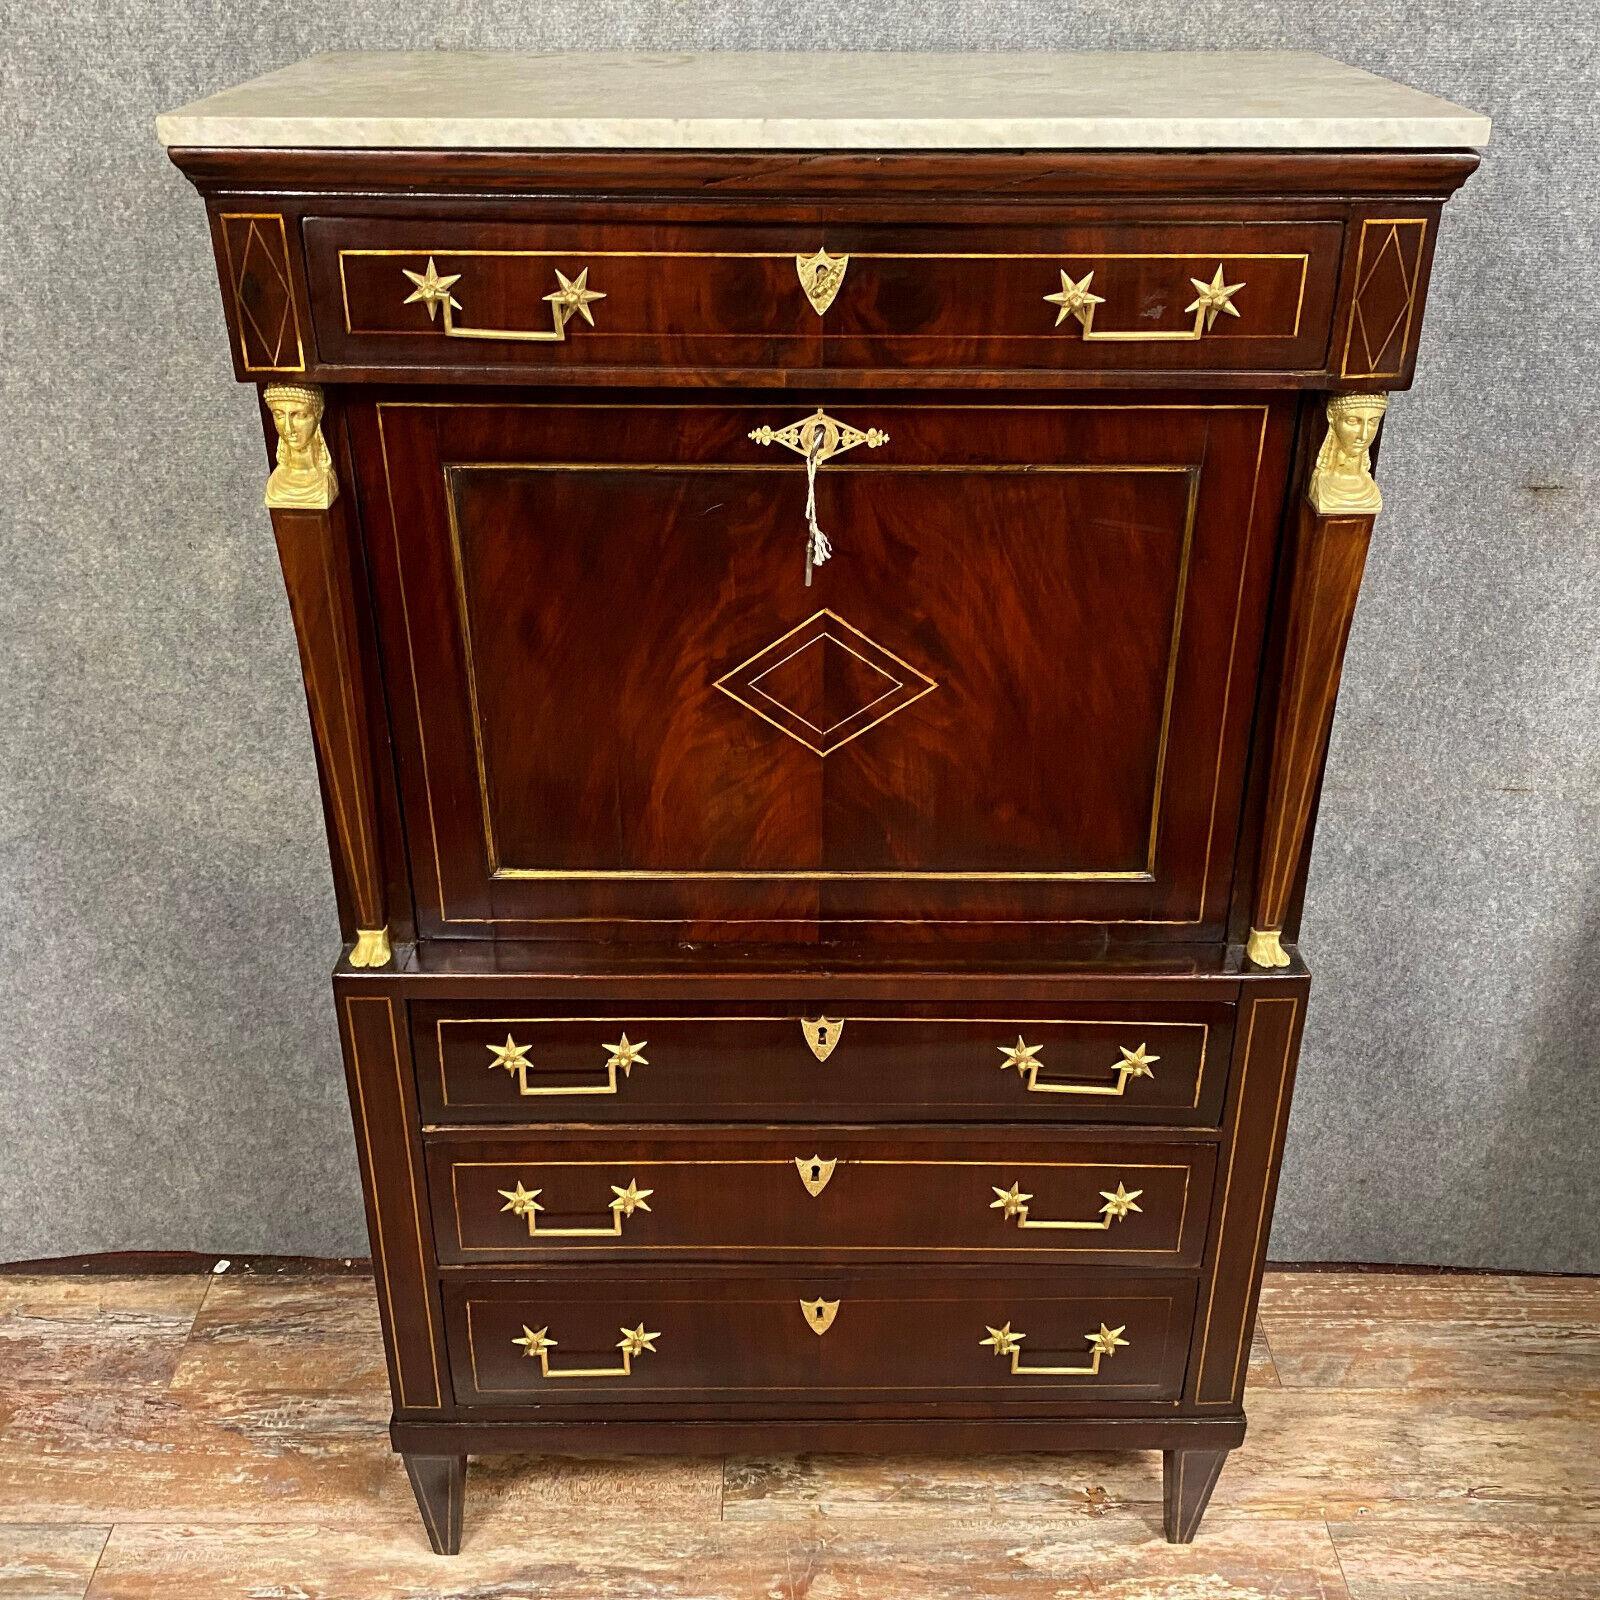 Step into the grandeur of the Consulate era with this exceptional mahogany secretary, crafted towards the end of the 18th century. Rich in history and elegance, this piece embodies the sophistication and style of its time, making it a prized